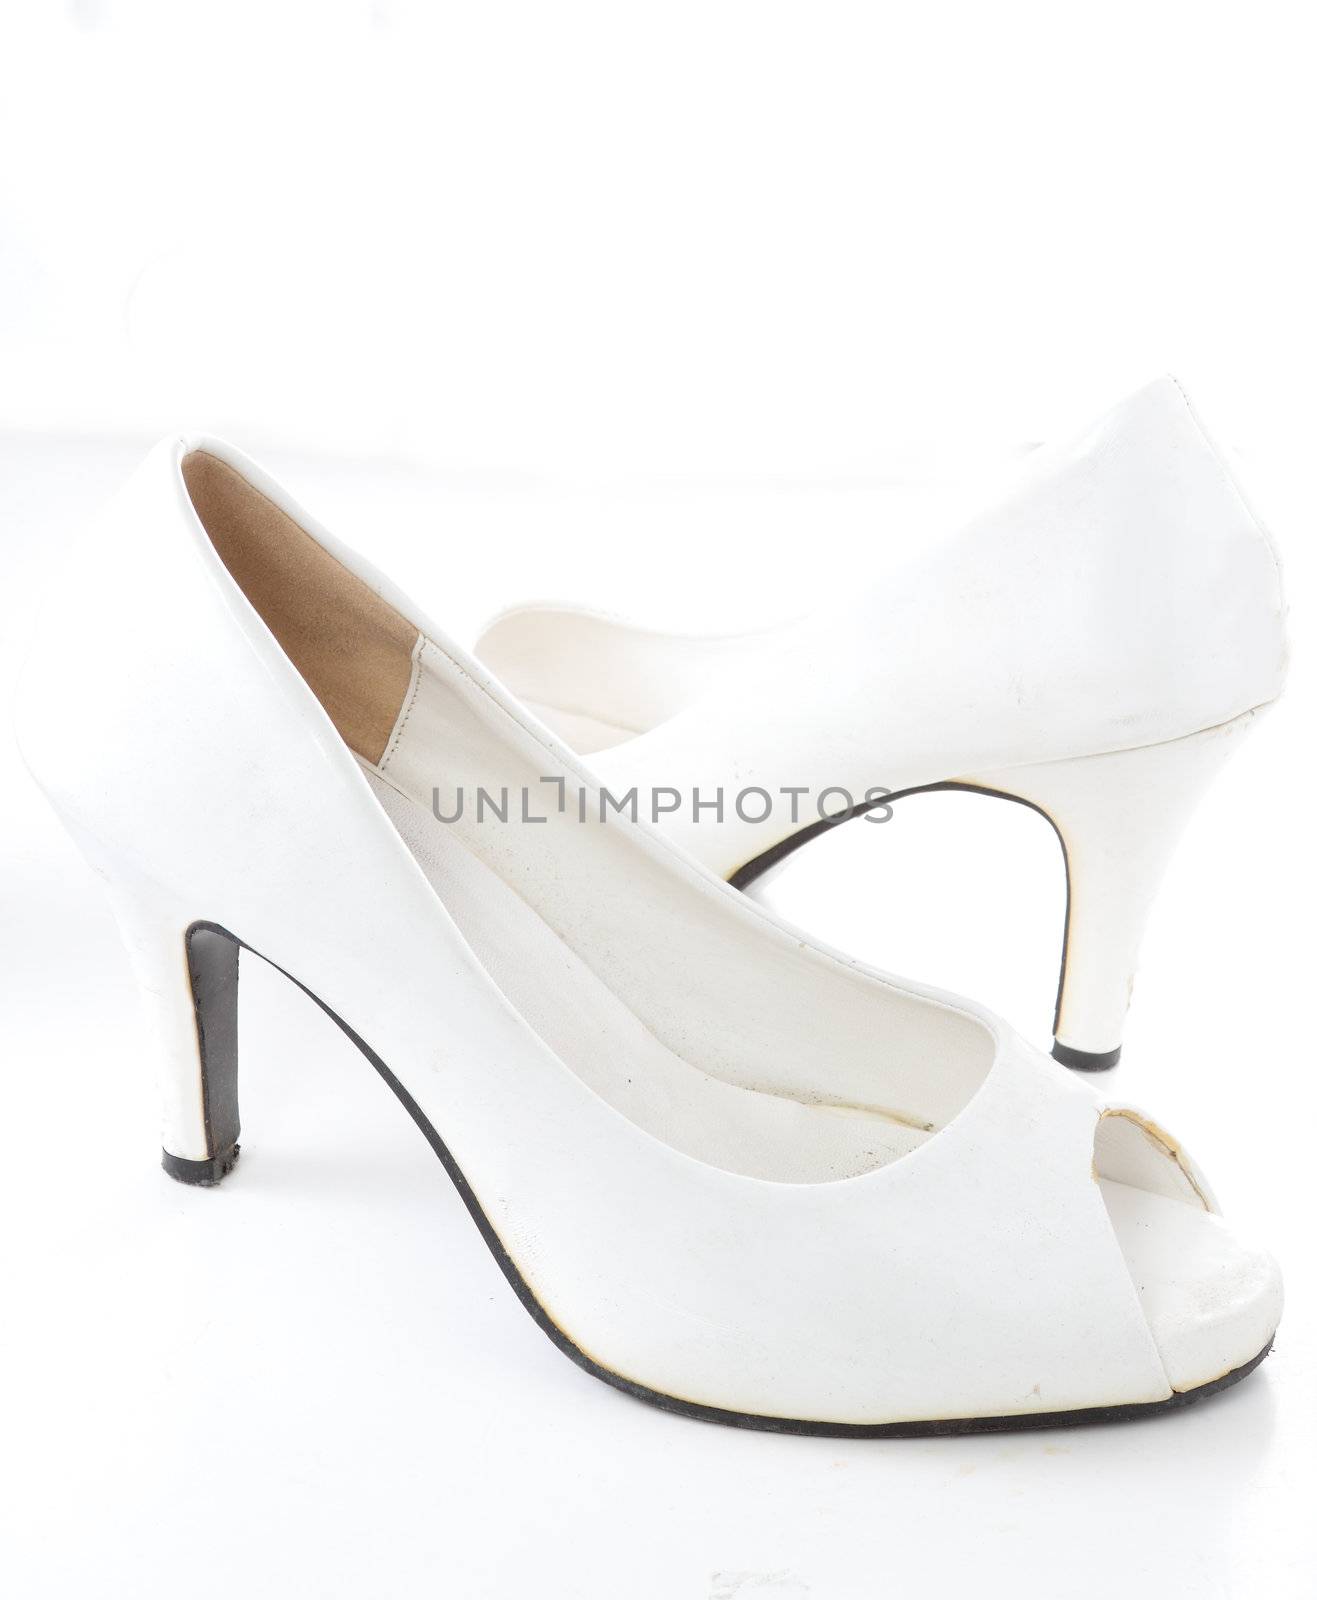 high heel women shoes on white background 